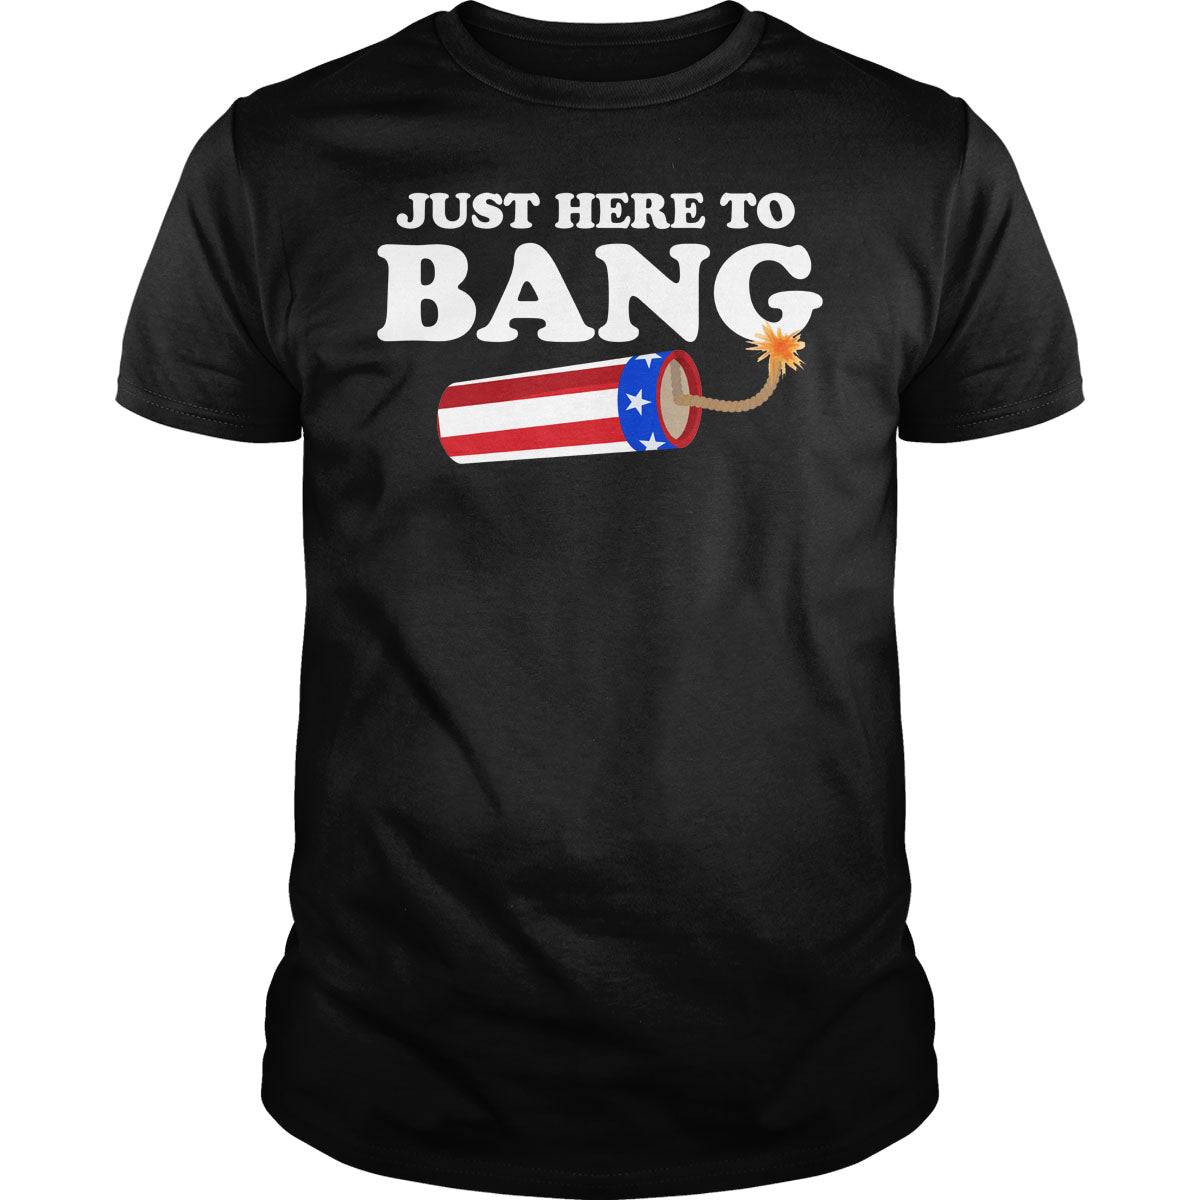 Just Here to Bang - BustedTees.com